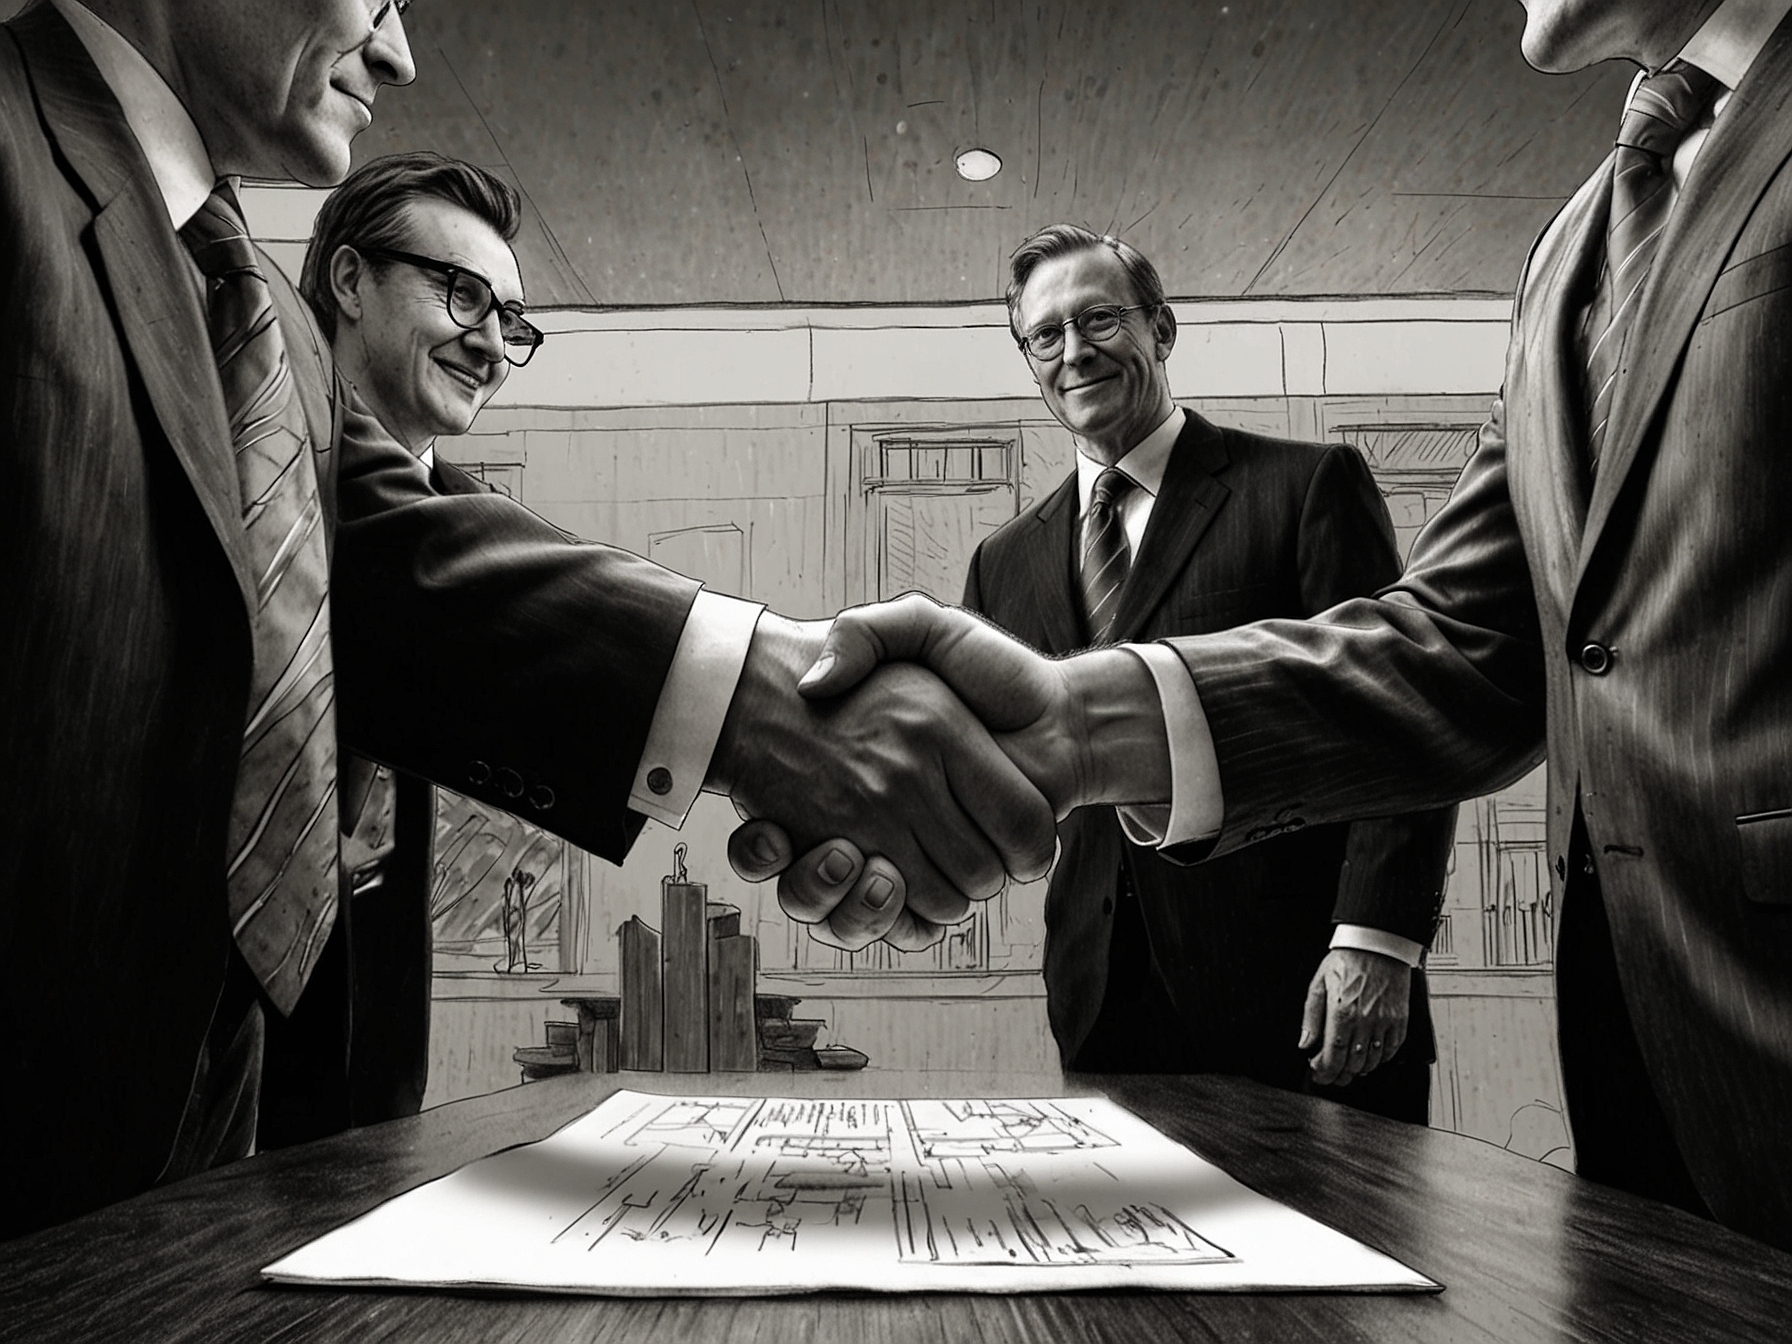 An illustration depicting a handshake between representatives of Advent International and Fisher Investments, symbolizing the strategic partnership and mutual growth potential.